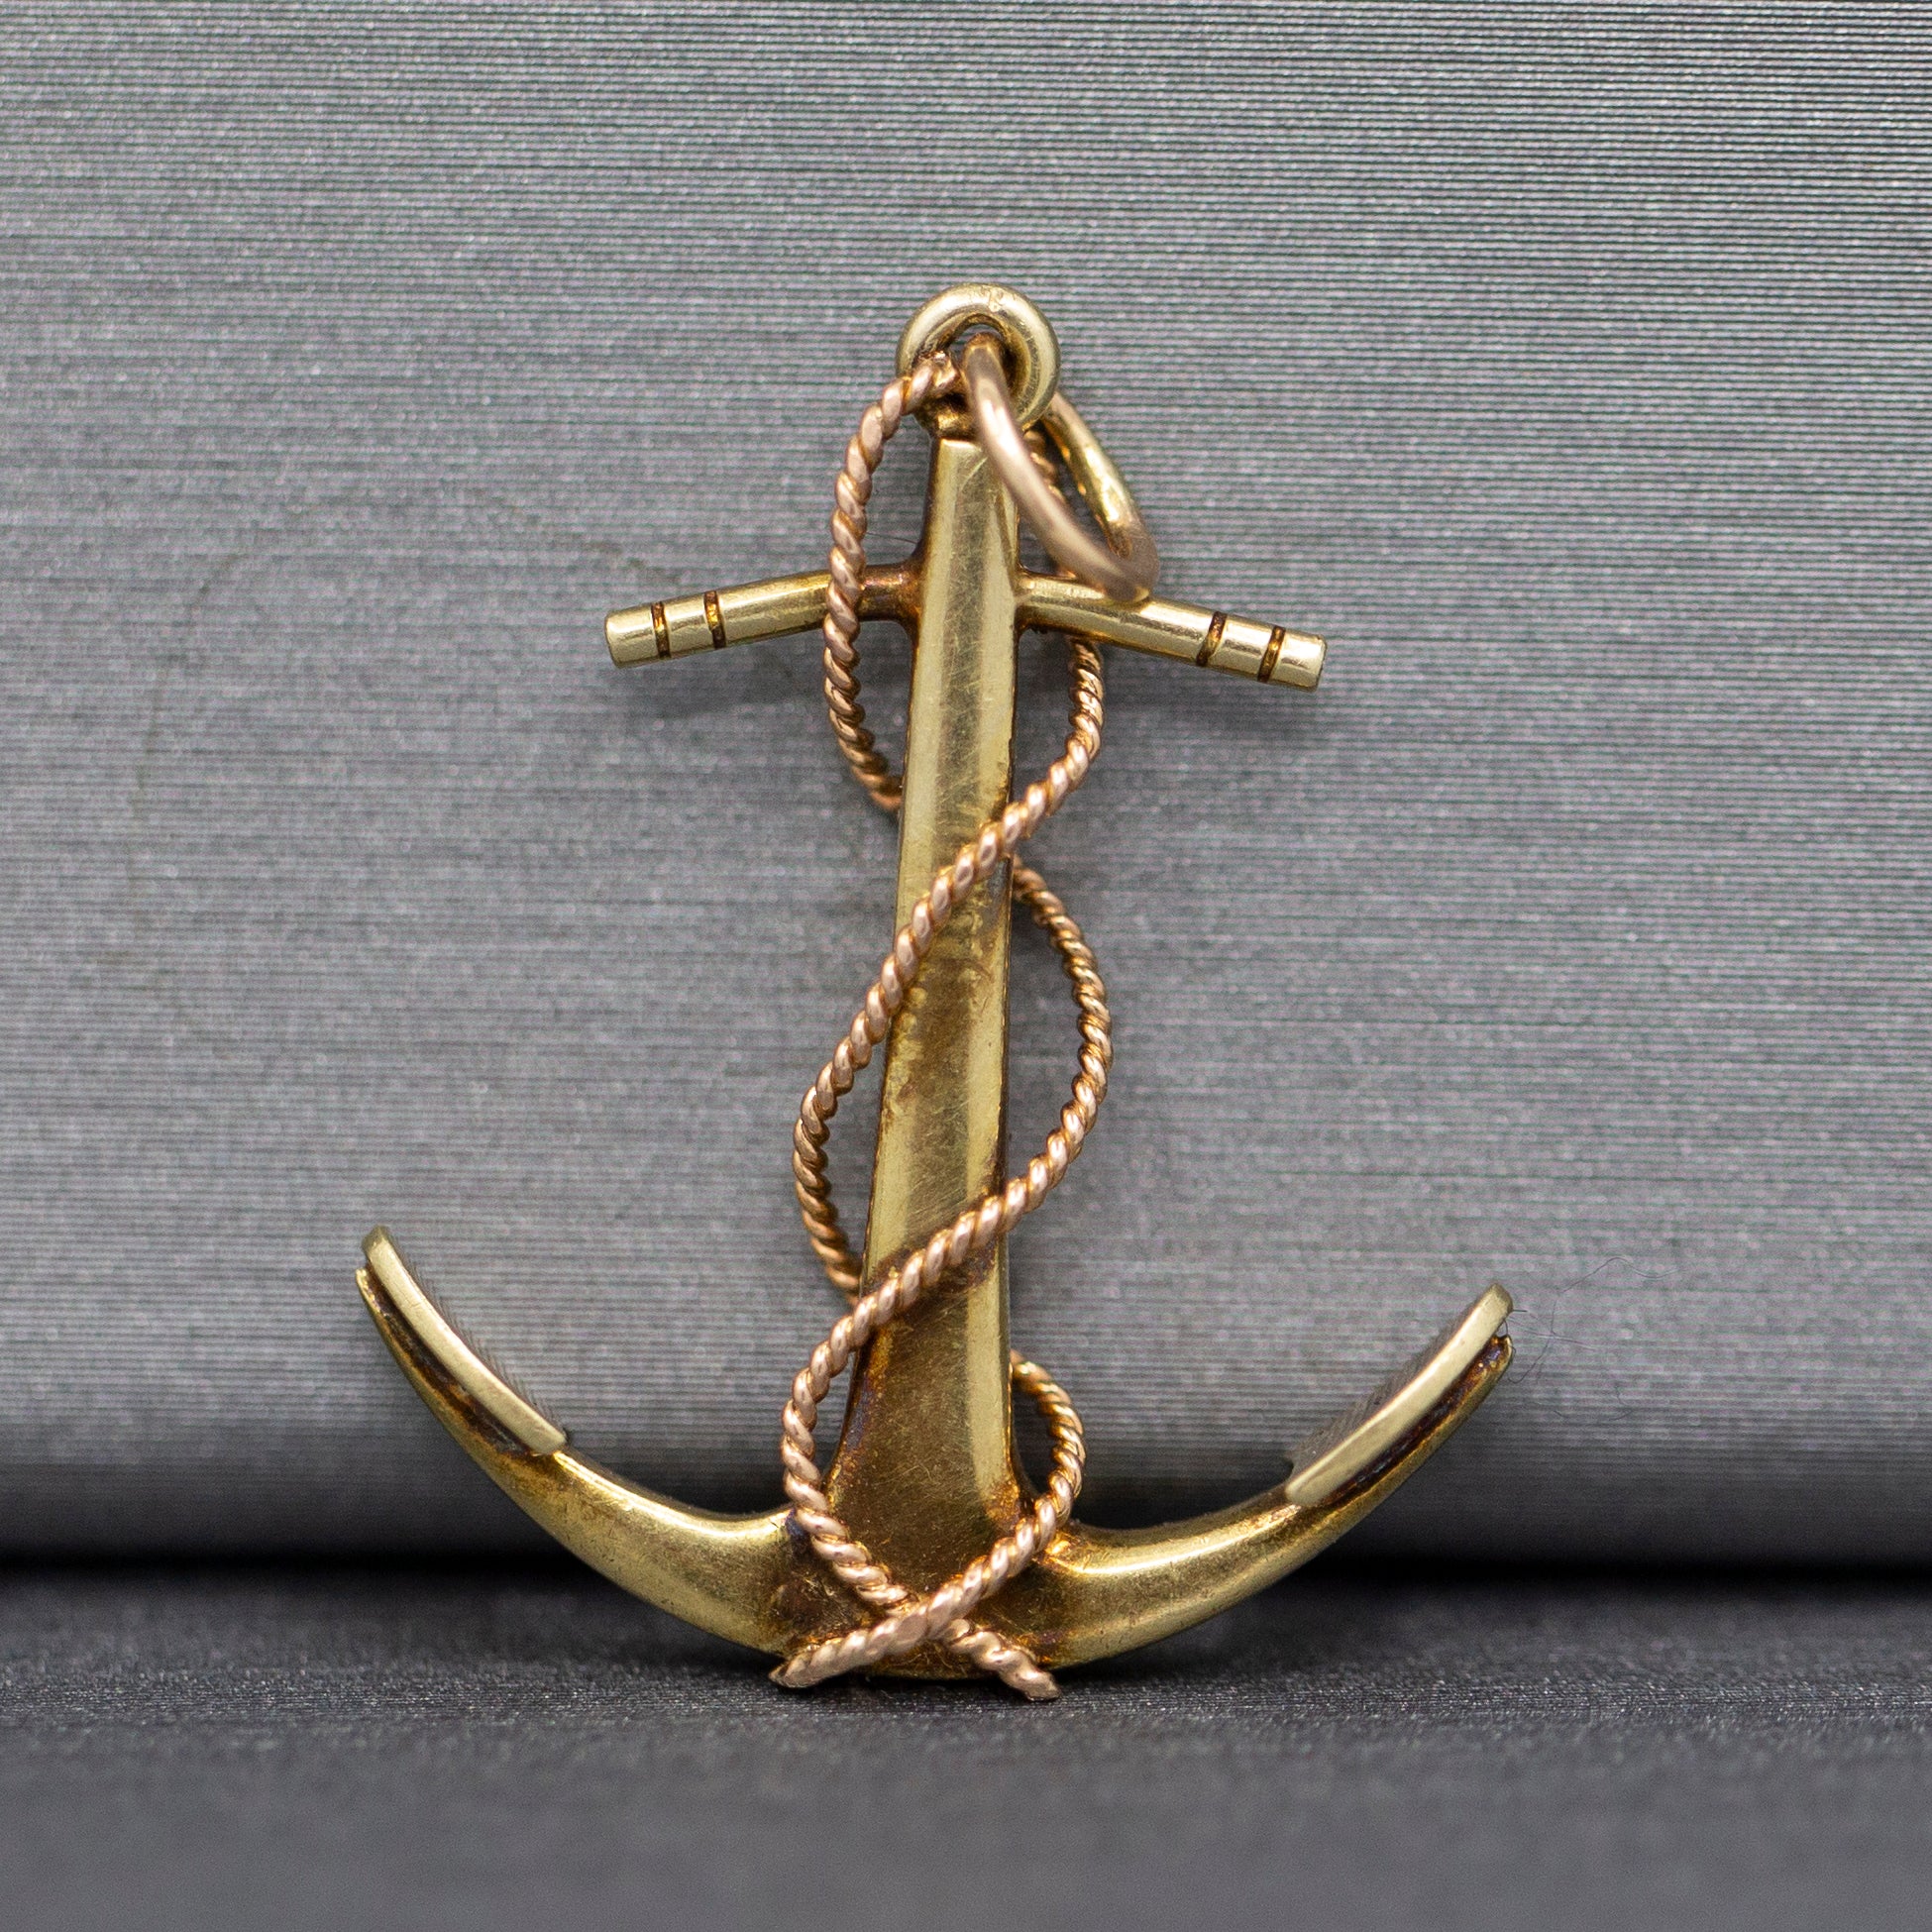 Edwardian Antique Nautical Anchor & Rope Charm Pendant in 14k Yellow Gold